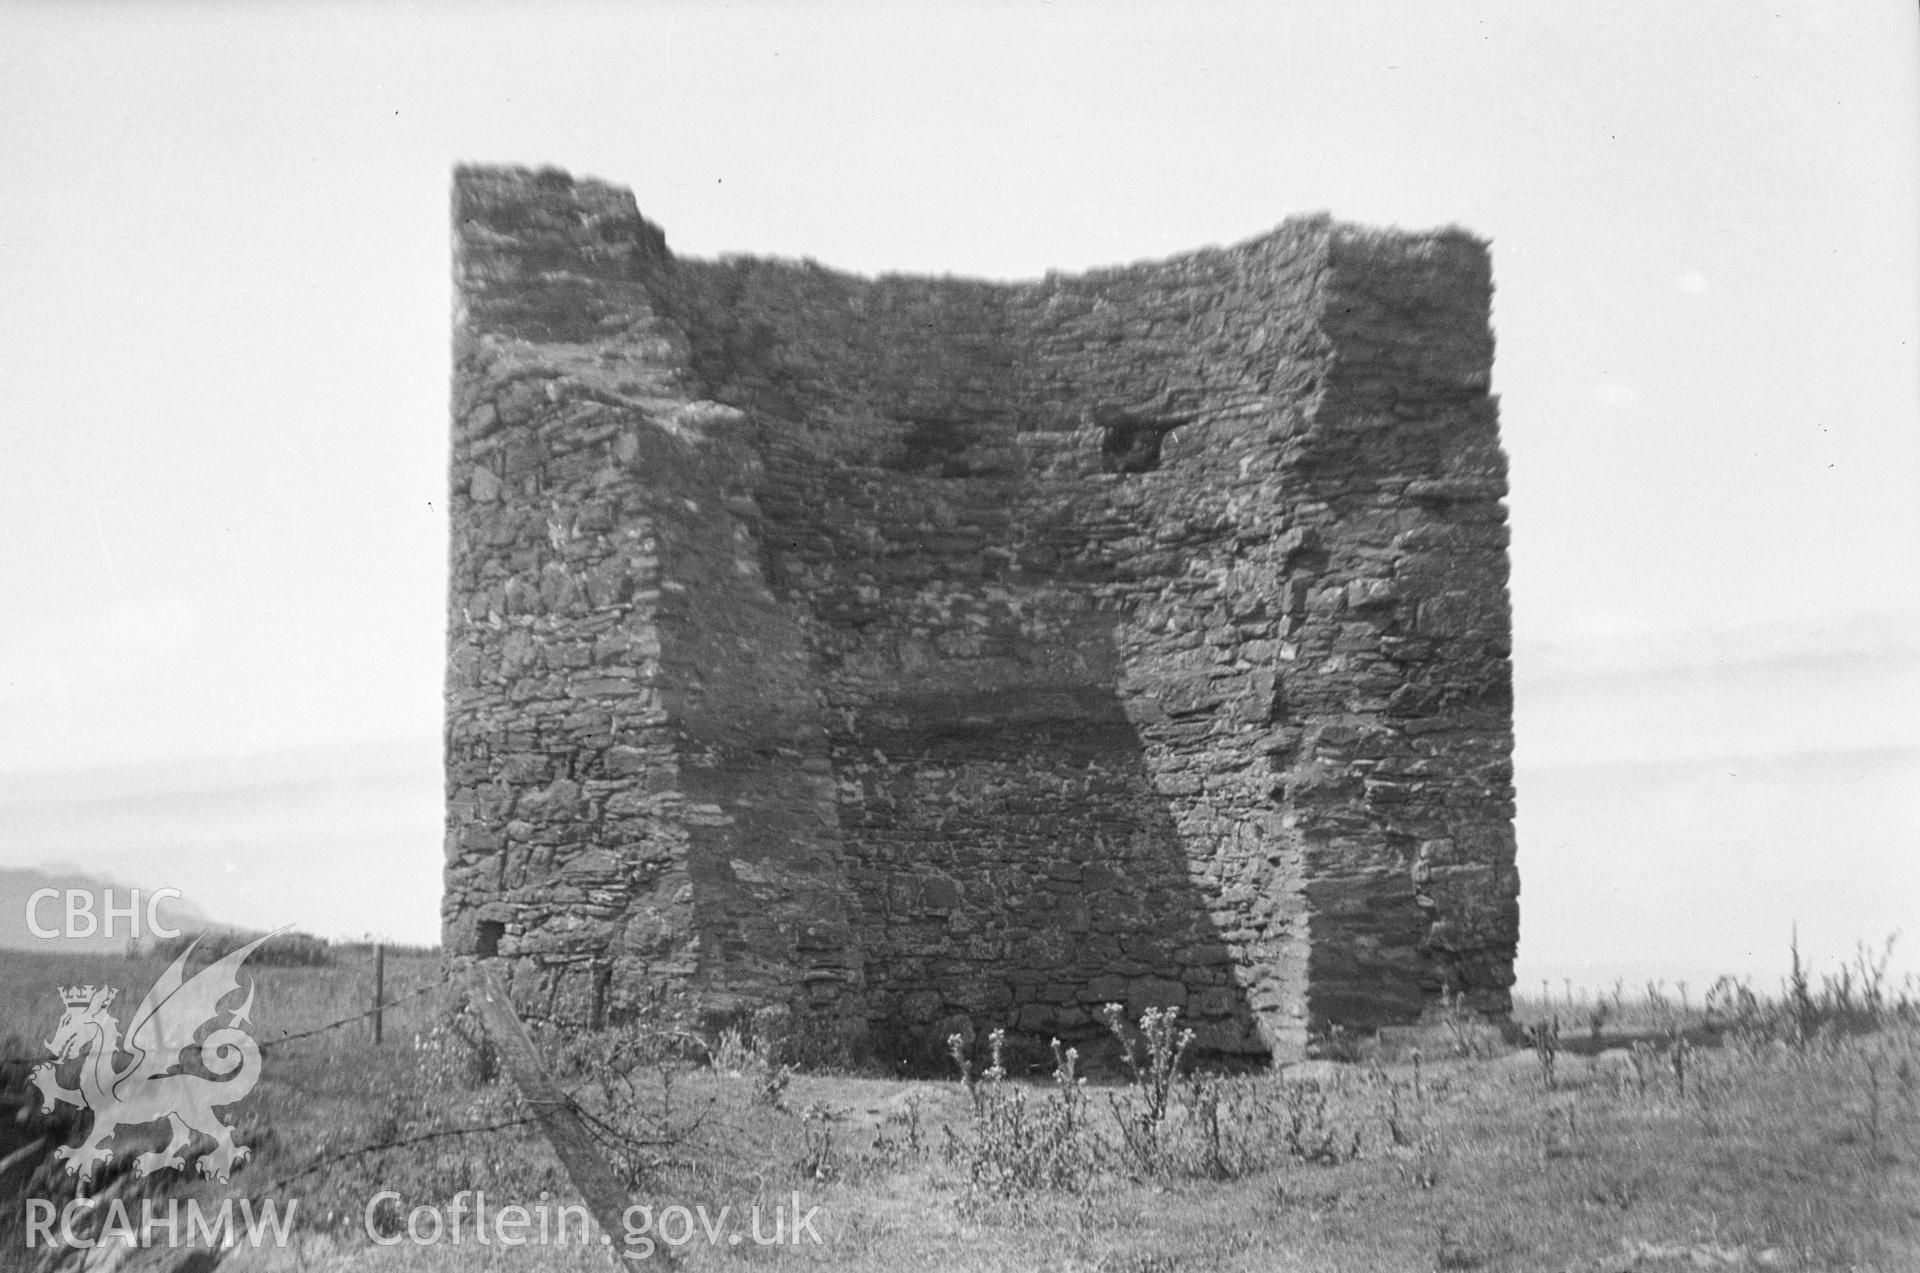 Digital copy of a nitrate negative showing Deganwy Tower.